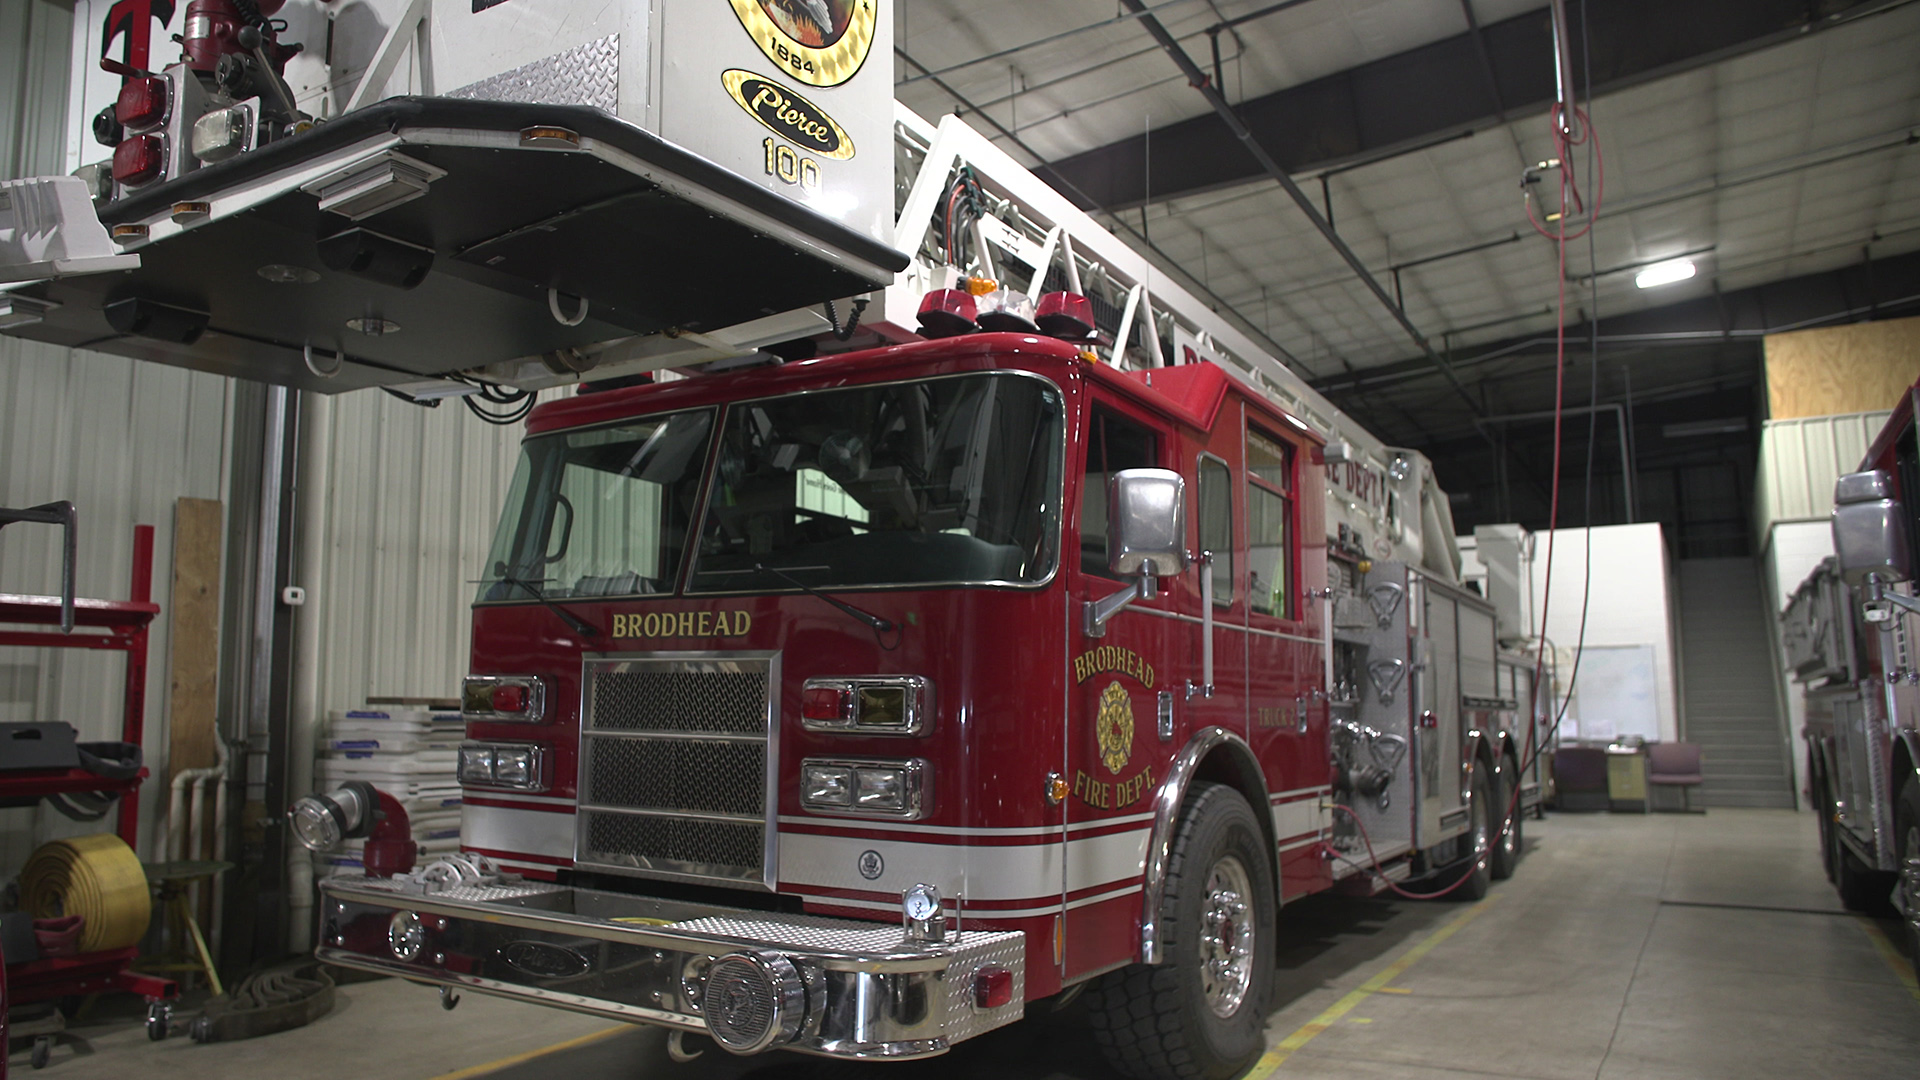 A fire truck with a roof-mounted latter sits parked inside an industrial garage with metal walls and an angled roof.